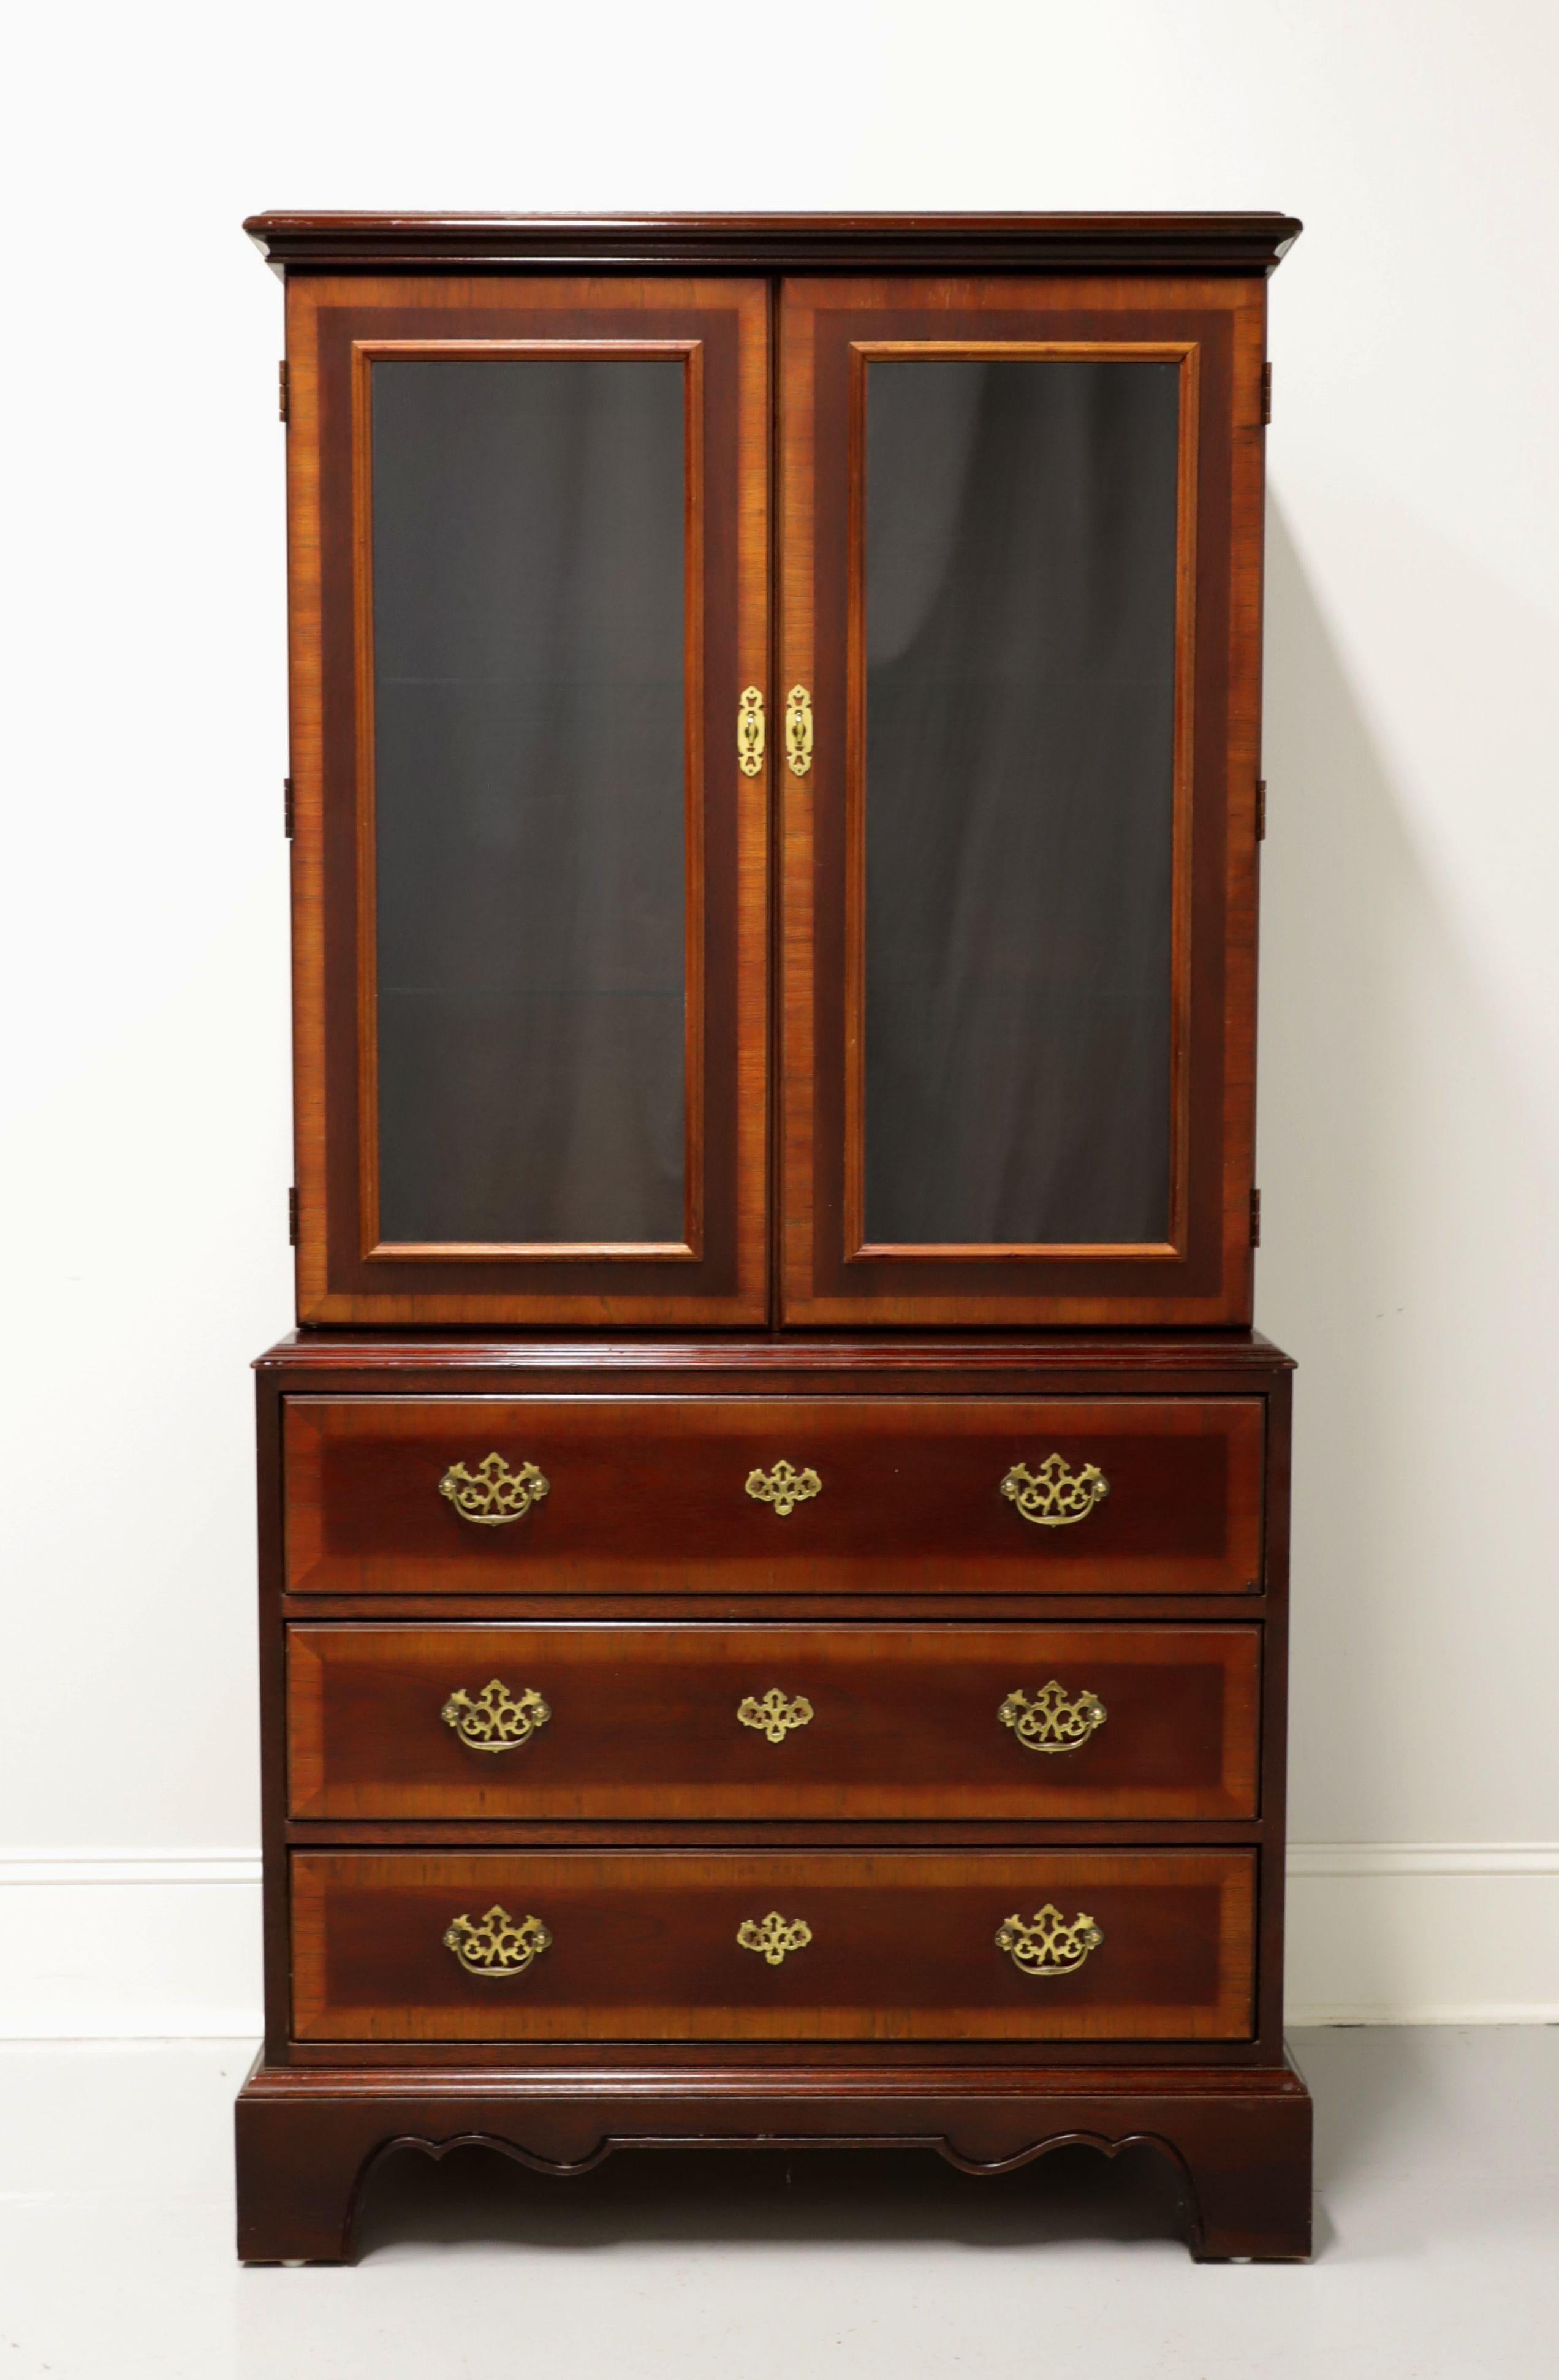 A Chippendale style display cabinet by Drexel, from their 18th Century Collection. Banded mahogany with brass hardware. Upper cabinet with dual glass doors, lighted interior and two adjustable glass shelves. Lower cabinet with three drawers of